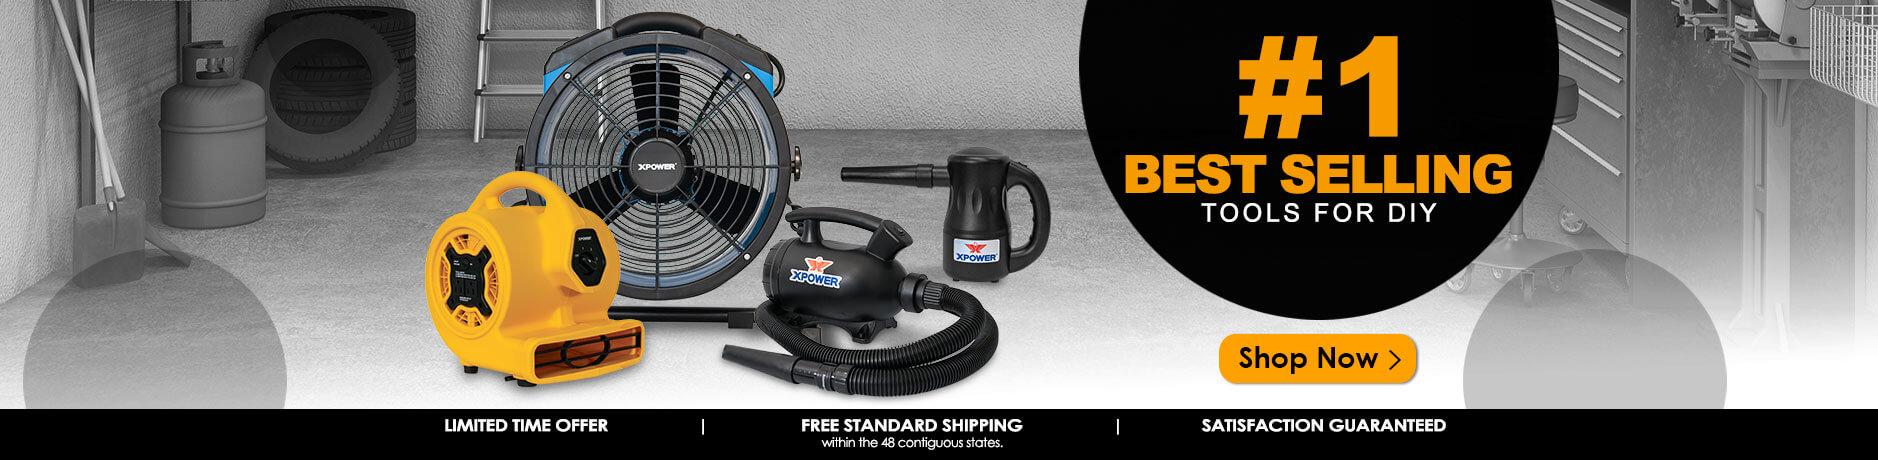 xpower best seller air mover